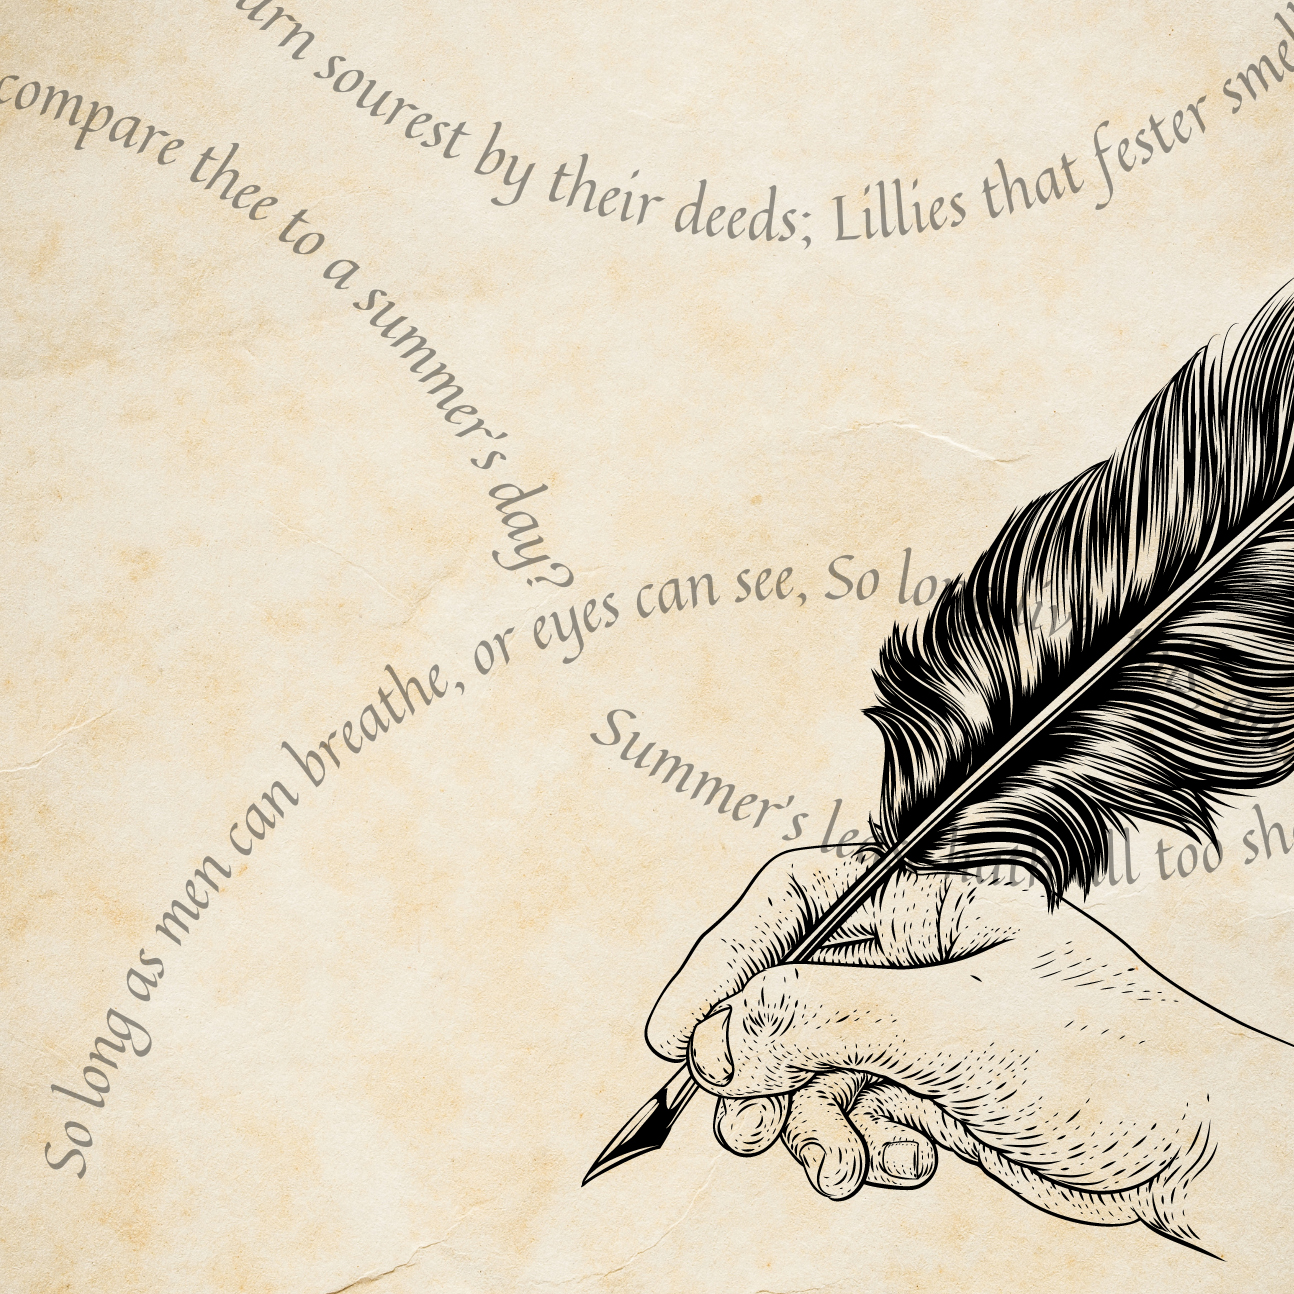 Drawing of a quill pen on parchment